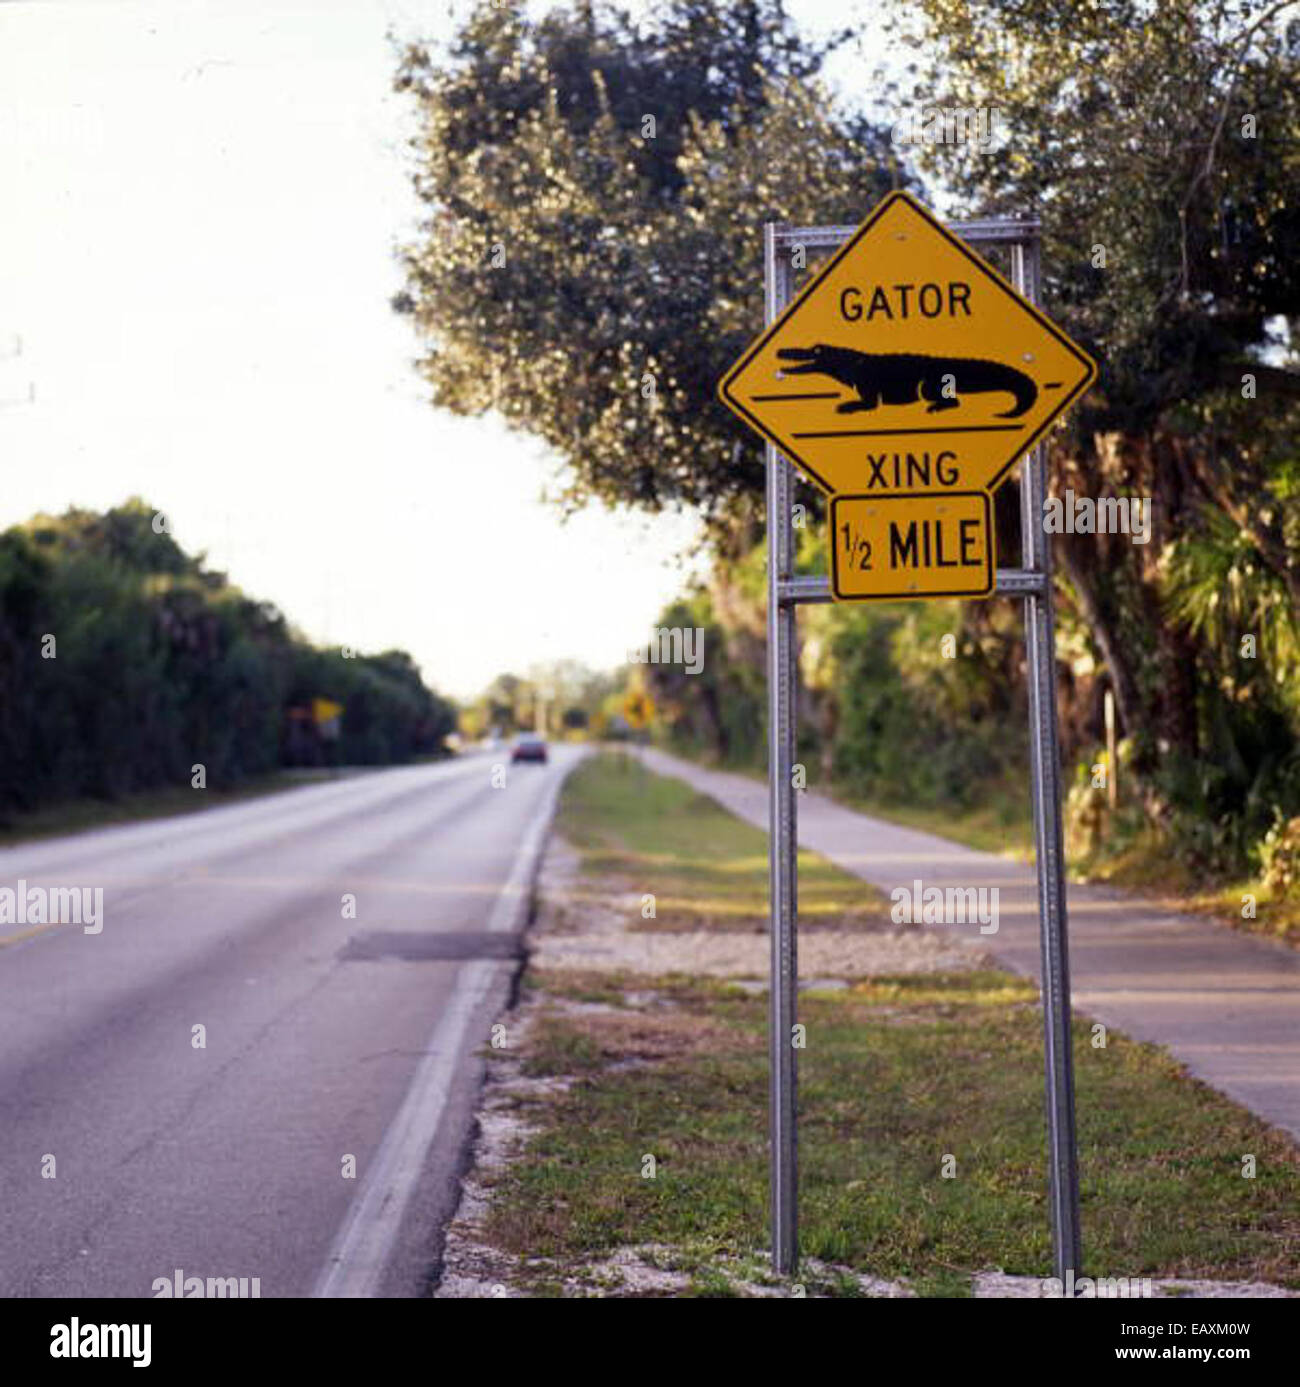 Gator Xing road sign in Lee County 00640617 o Foto Stock